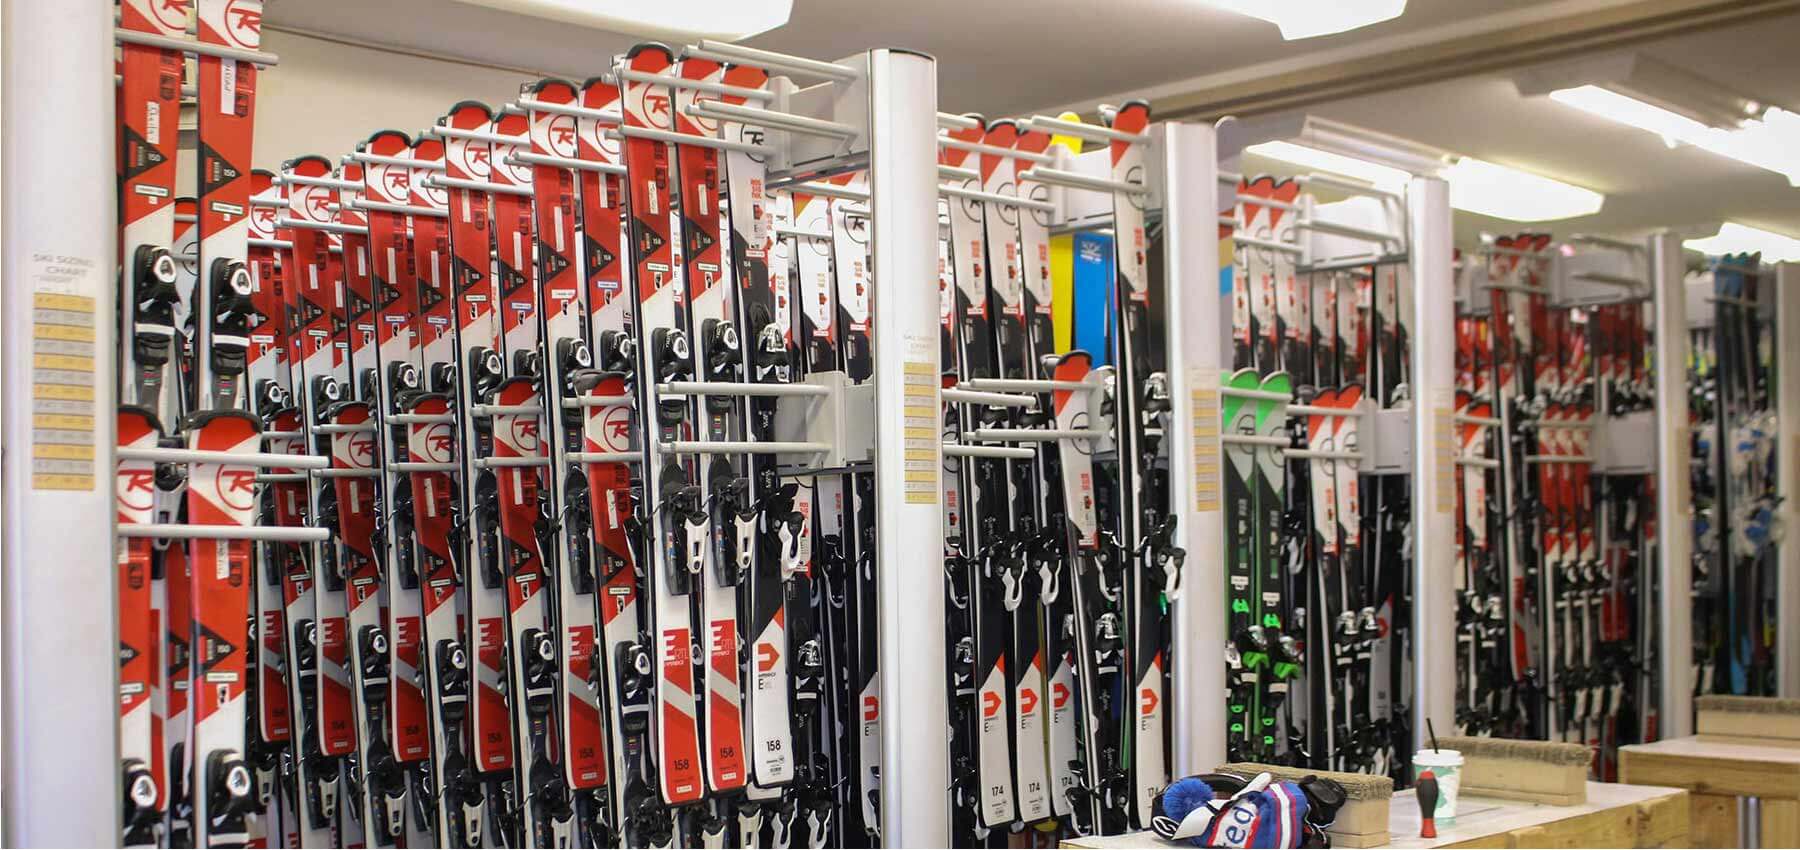 renting ski and snowboard gear, rules for renting